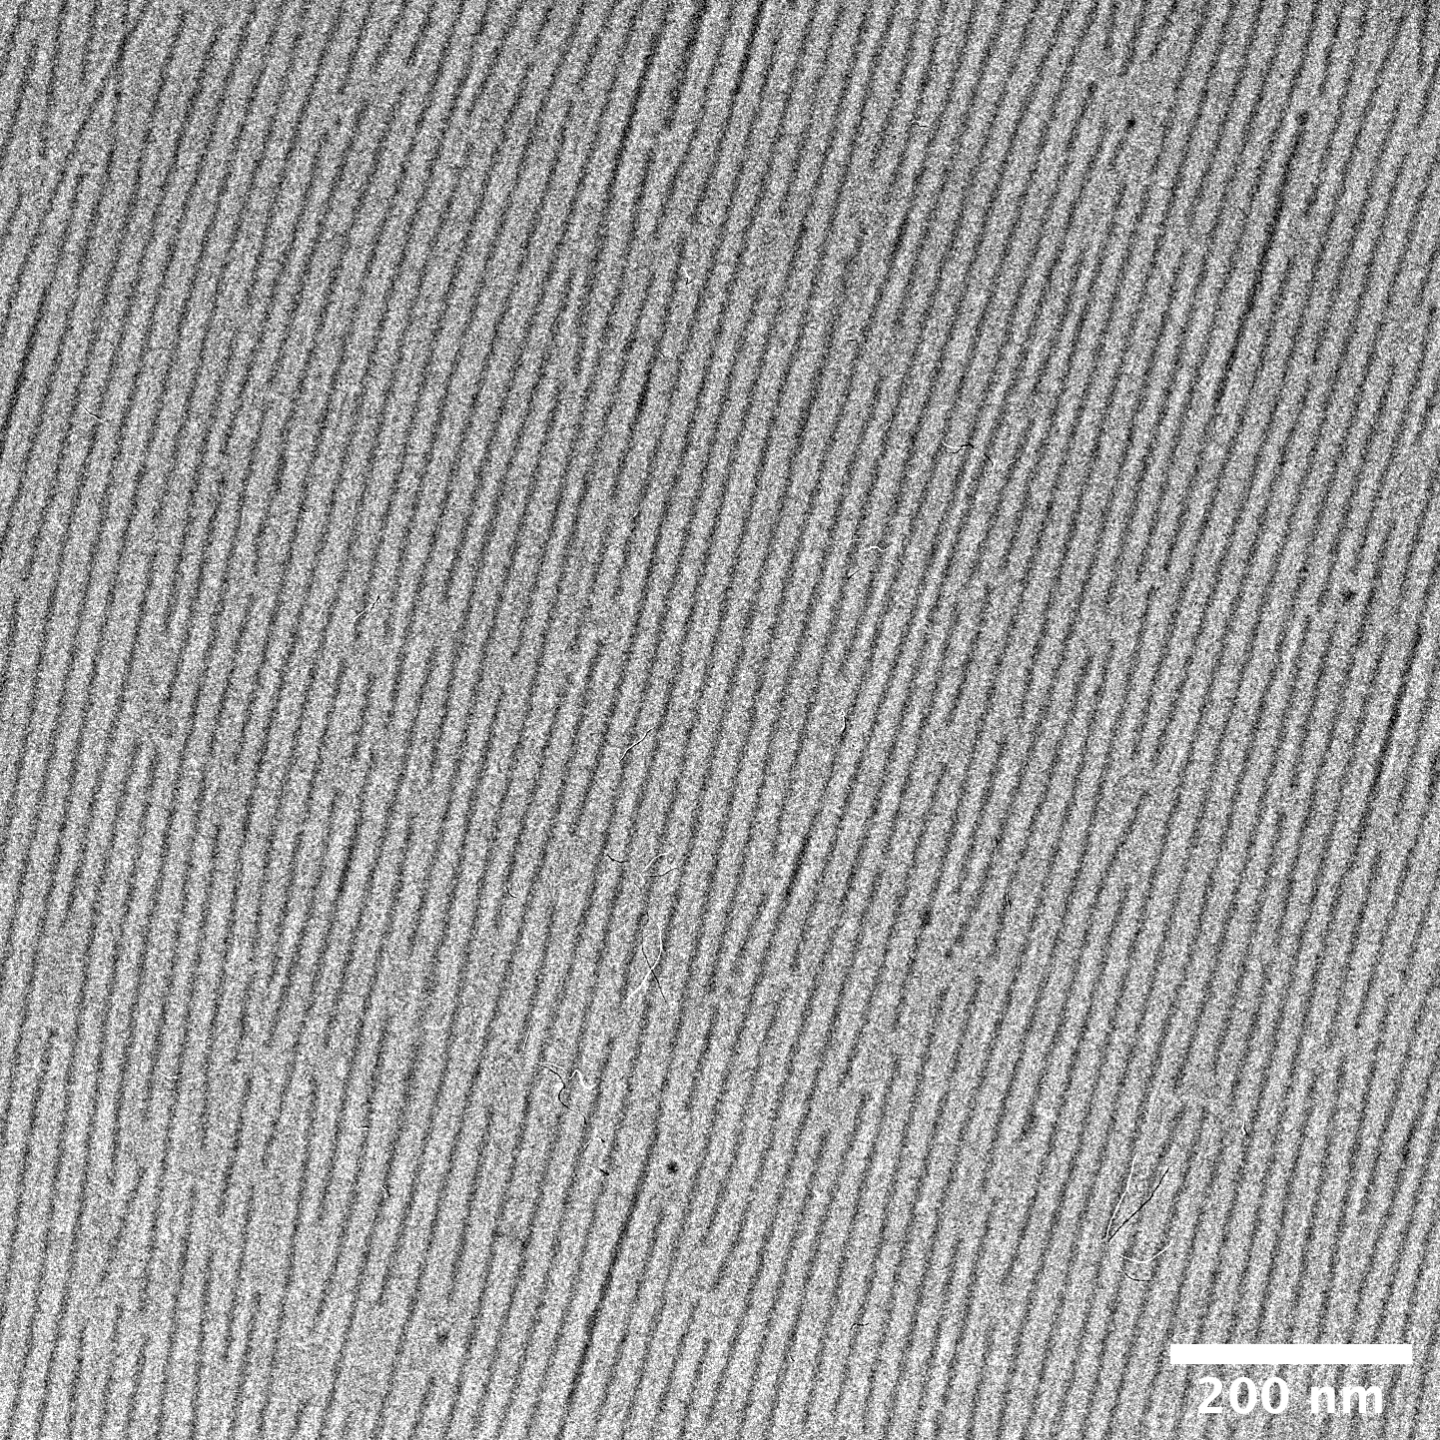 a black-and-white image of the hydrogel under a microscope